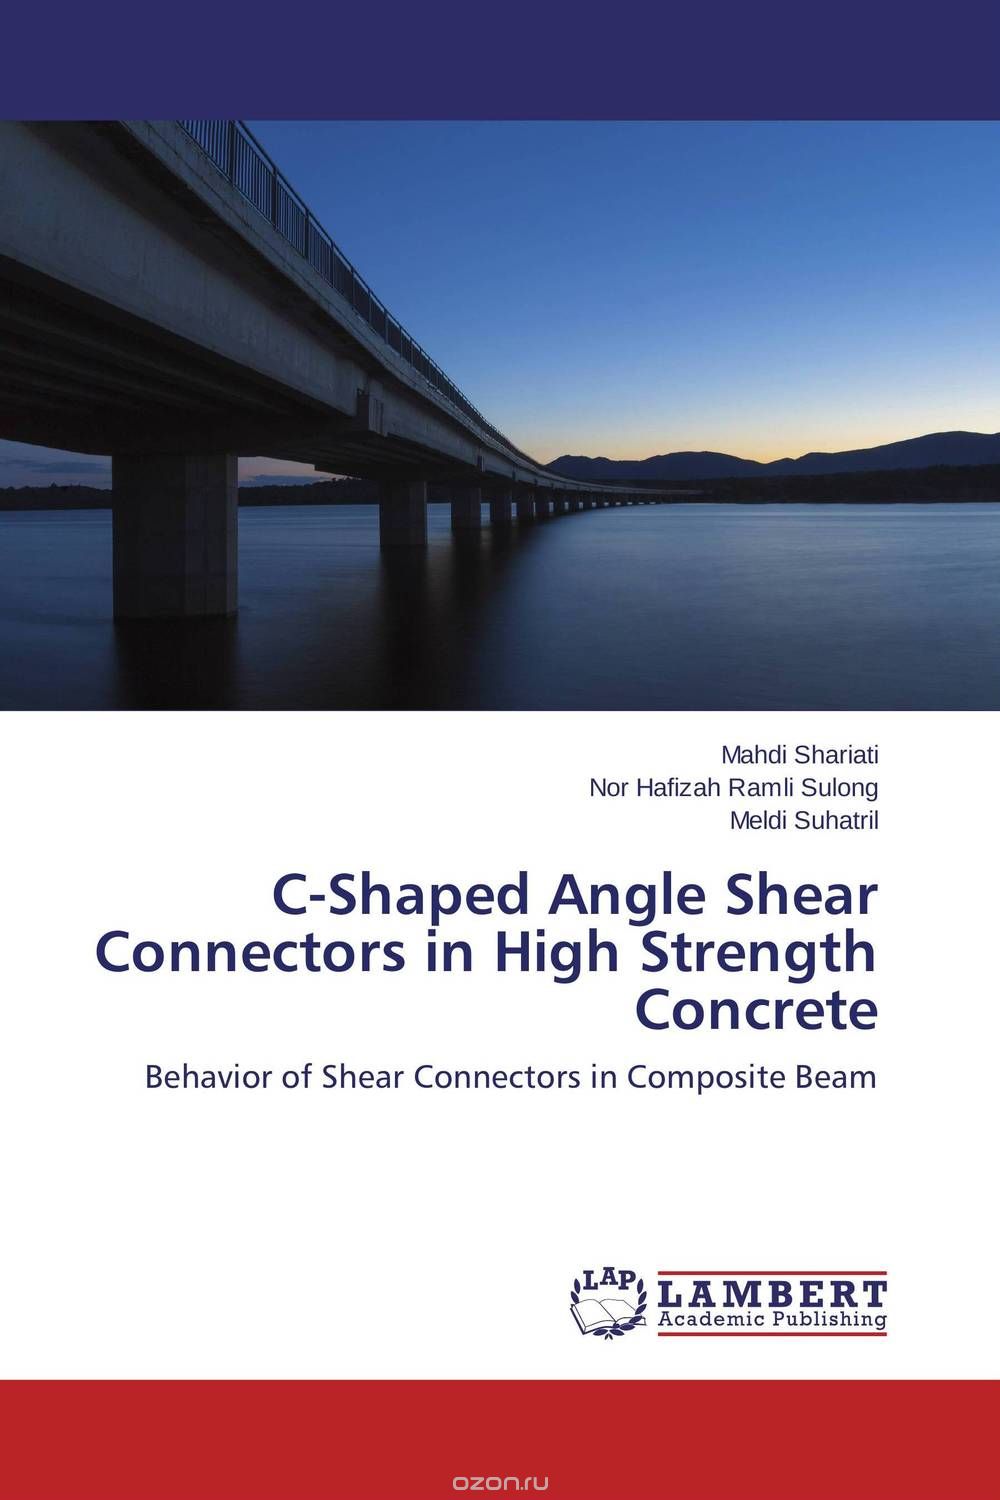 C-Shaped Angle Shear Connectors in High Strength Concrete